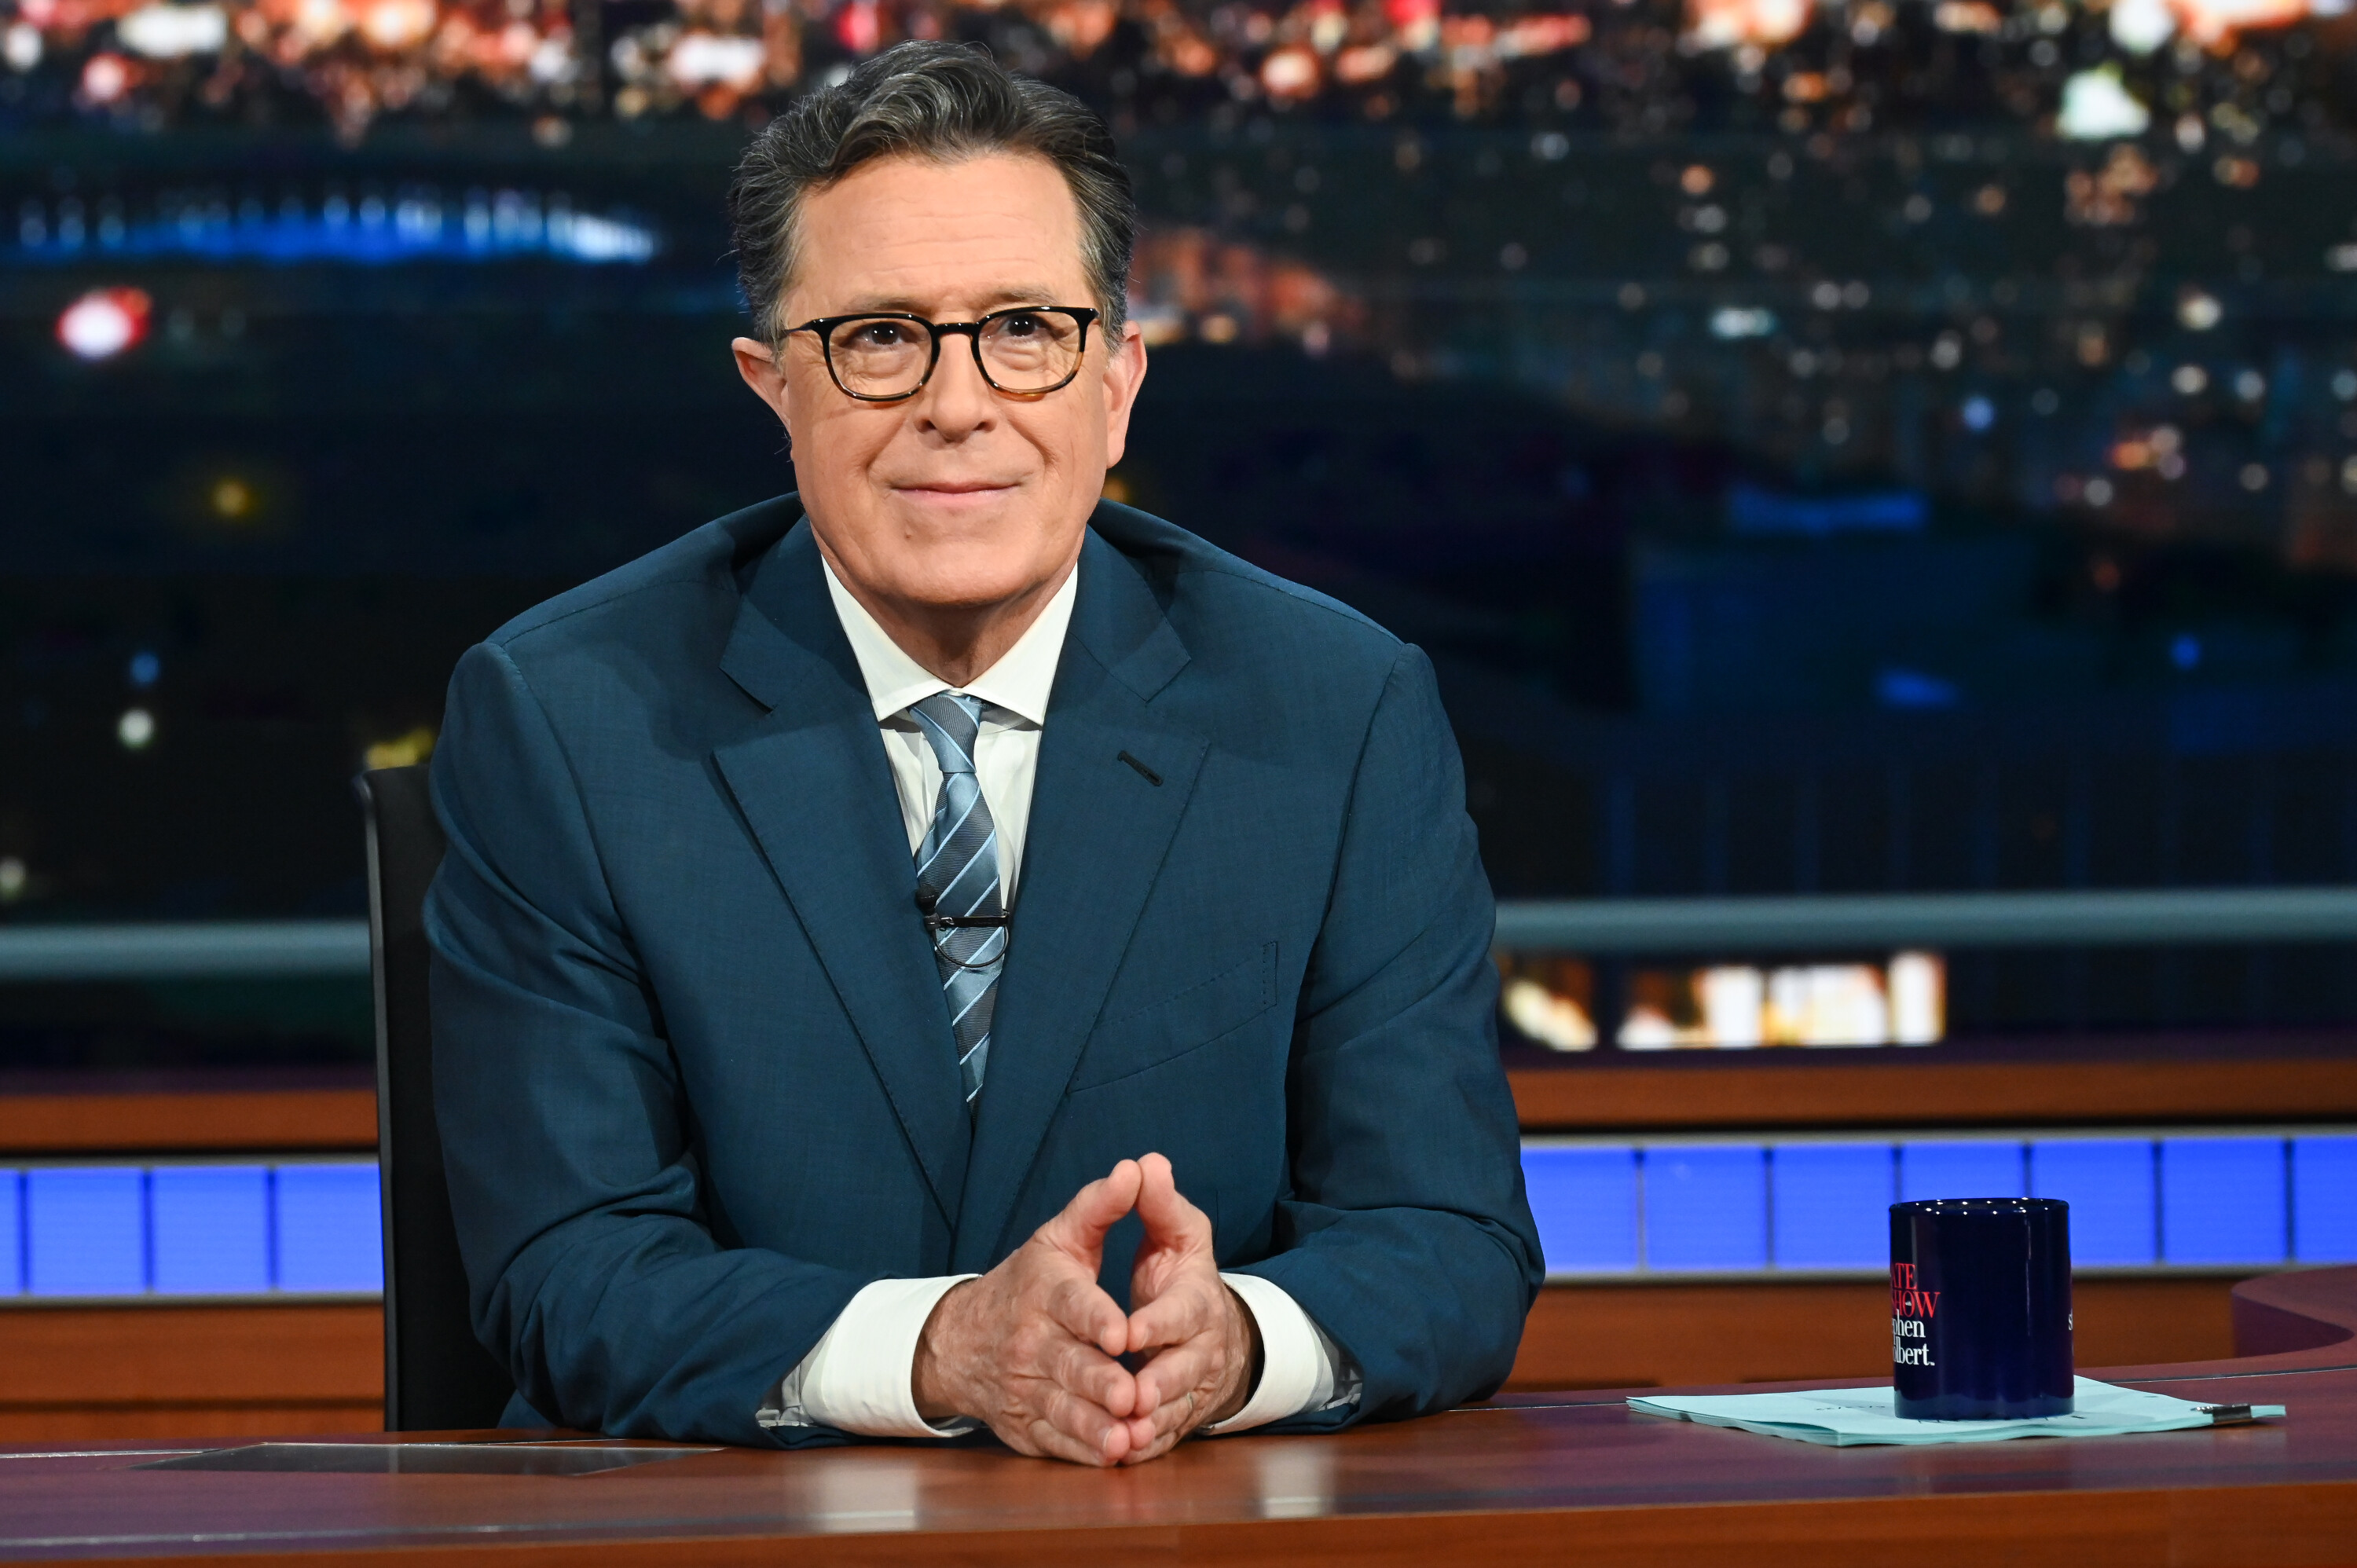 Stephen Colbert at "The Late Show with Stephen Colbert" on June 13, 2022, in New York | Source: Getty Images